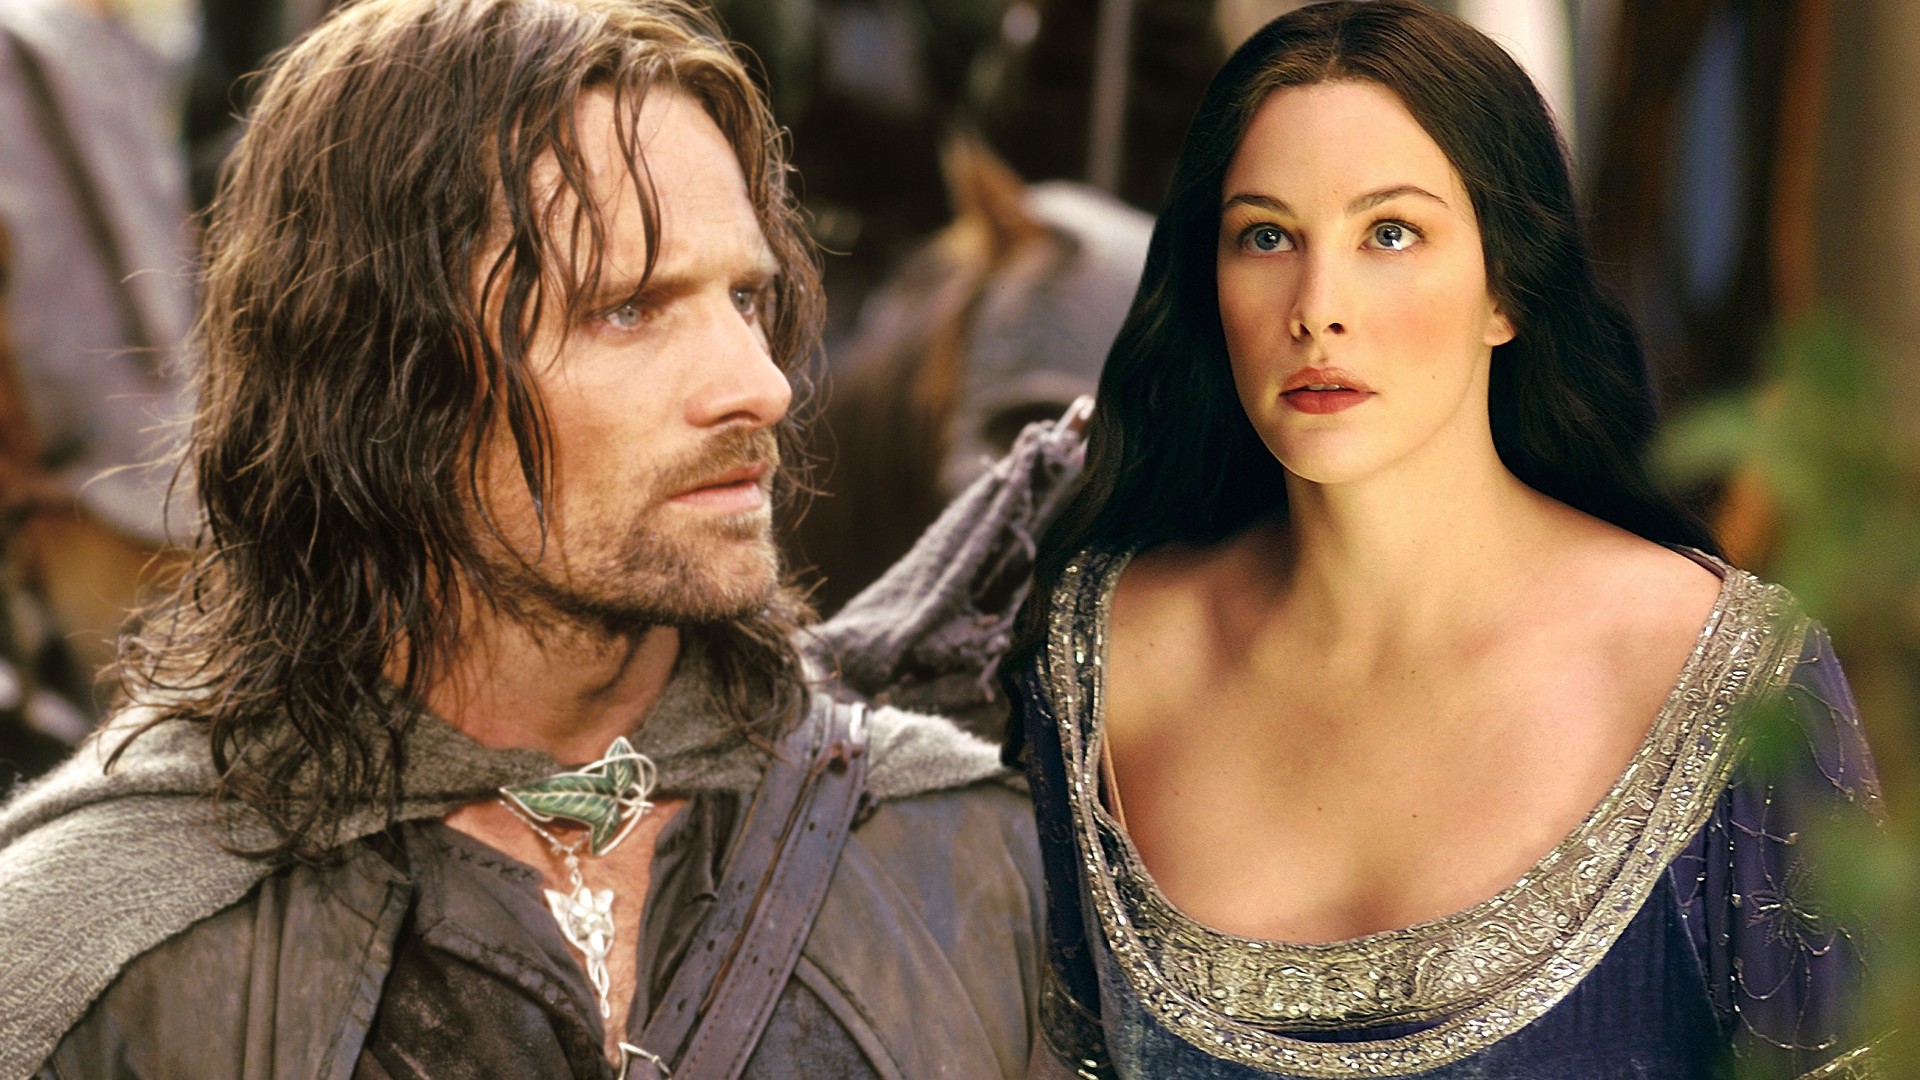 Why did Viggo Mortensen agree to play Aragorn in The Hobbit even though it  meant less screen time than his role as Gandalf in The Lord of the Rings? -  Quora